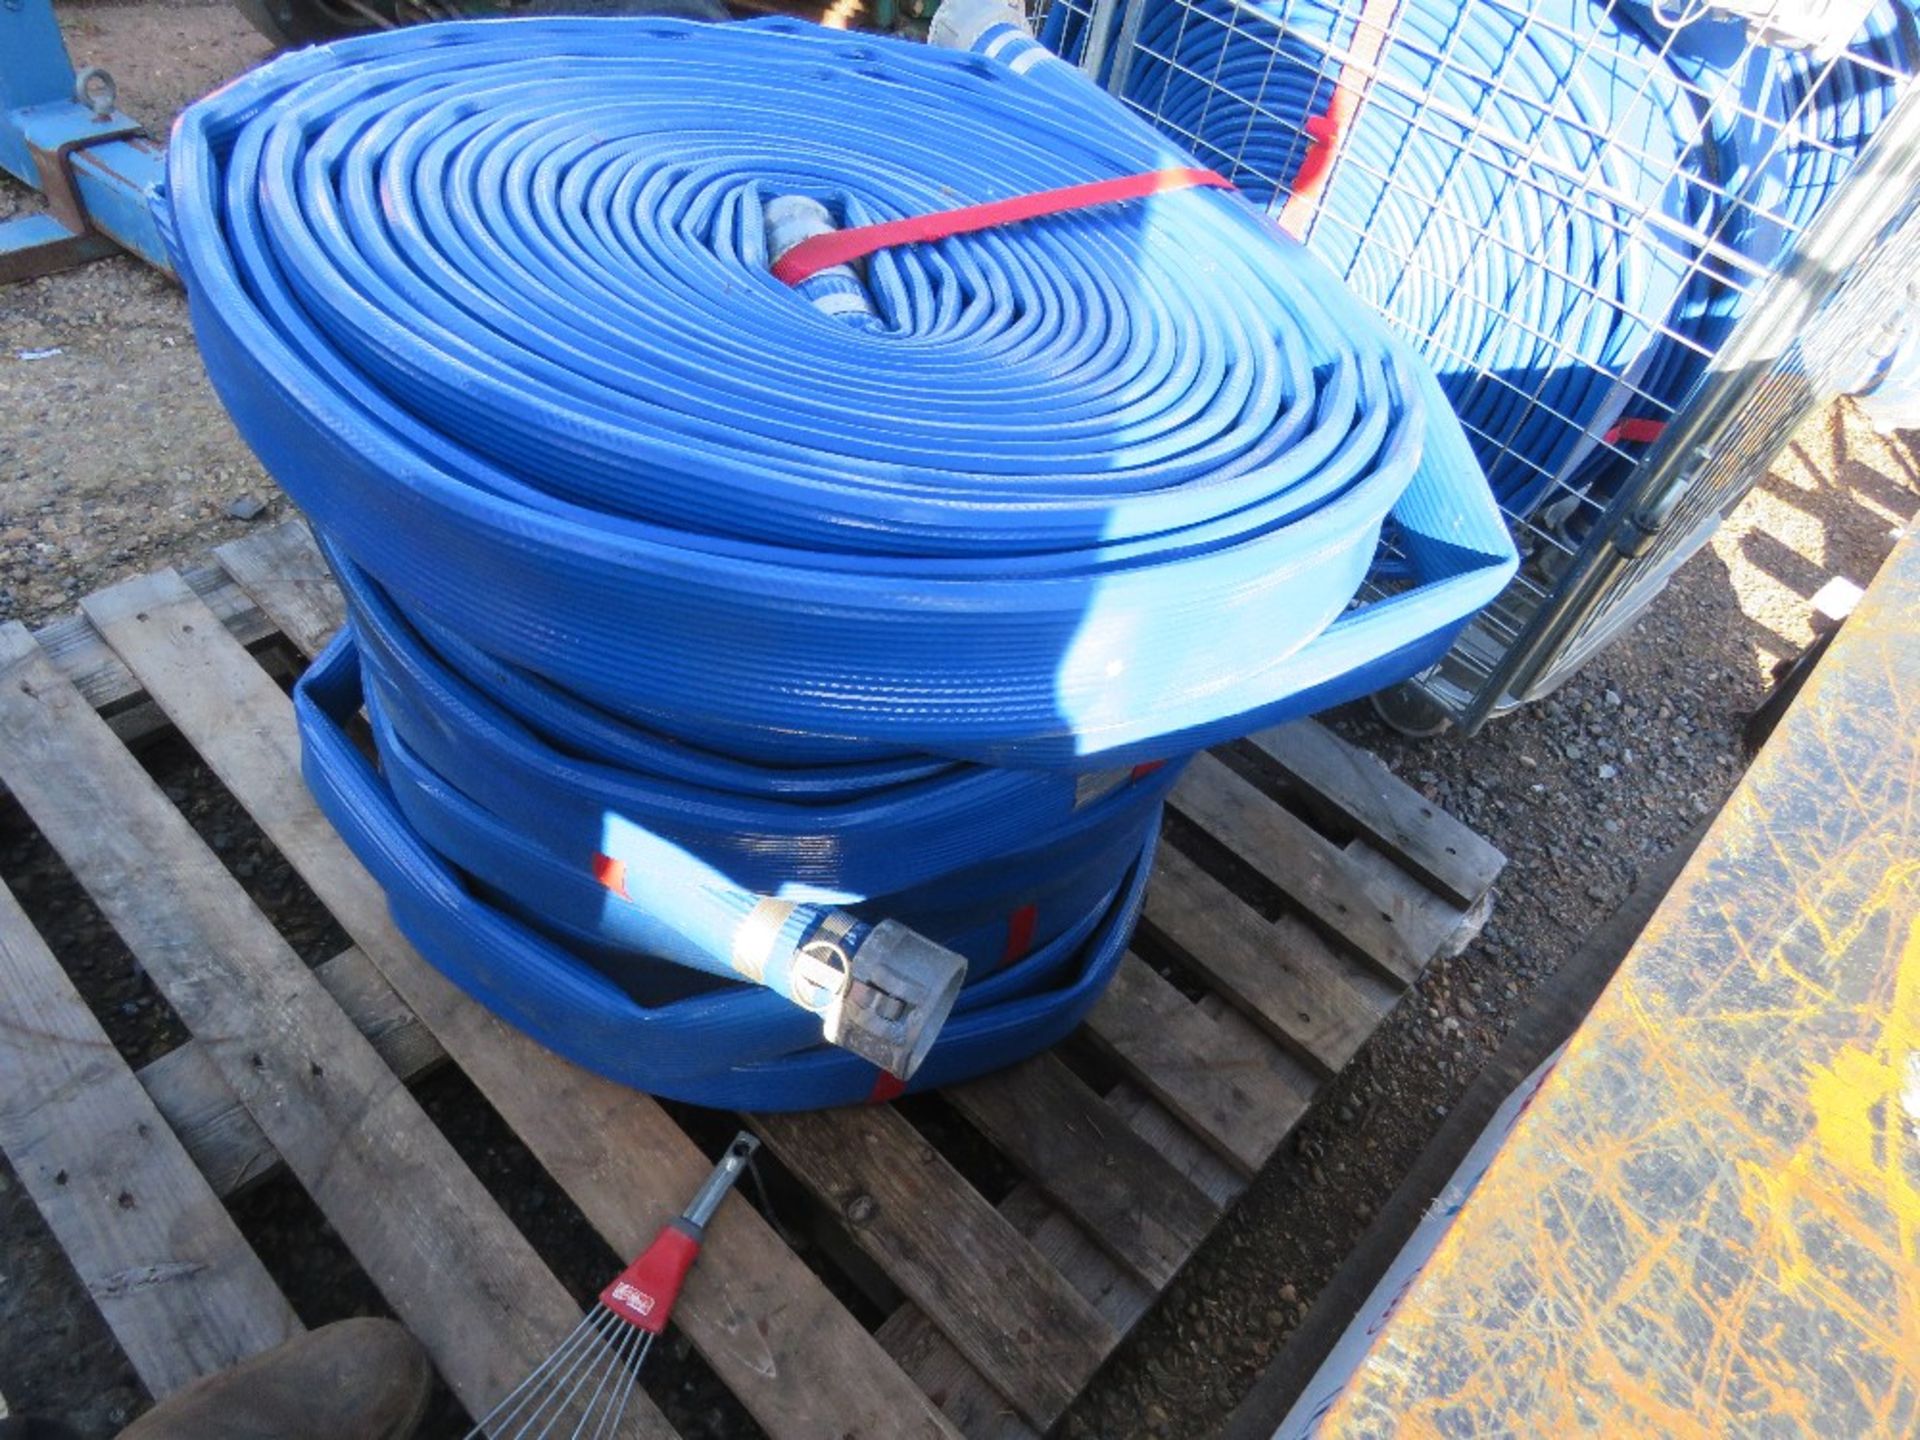 6 X LAY FLAT HOSES. 60MM WIDTH APPROX. LITTLE/ UNUSED. THIS LOT IS SOLD UNDER THE AUCTIONEERS MA - Image 4 of 4